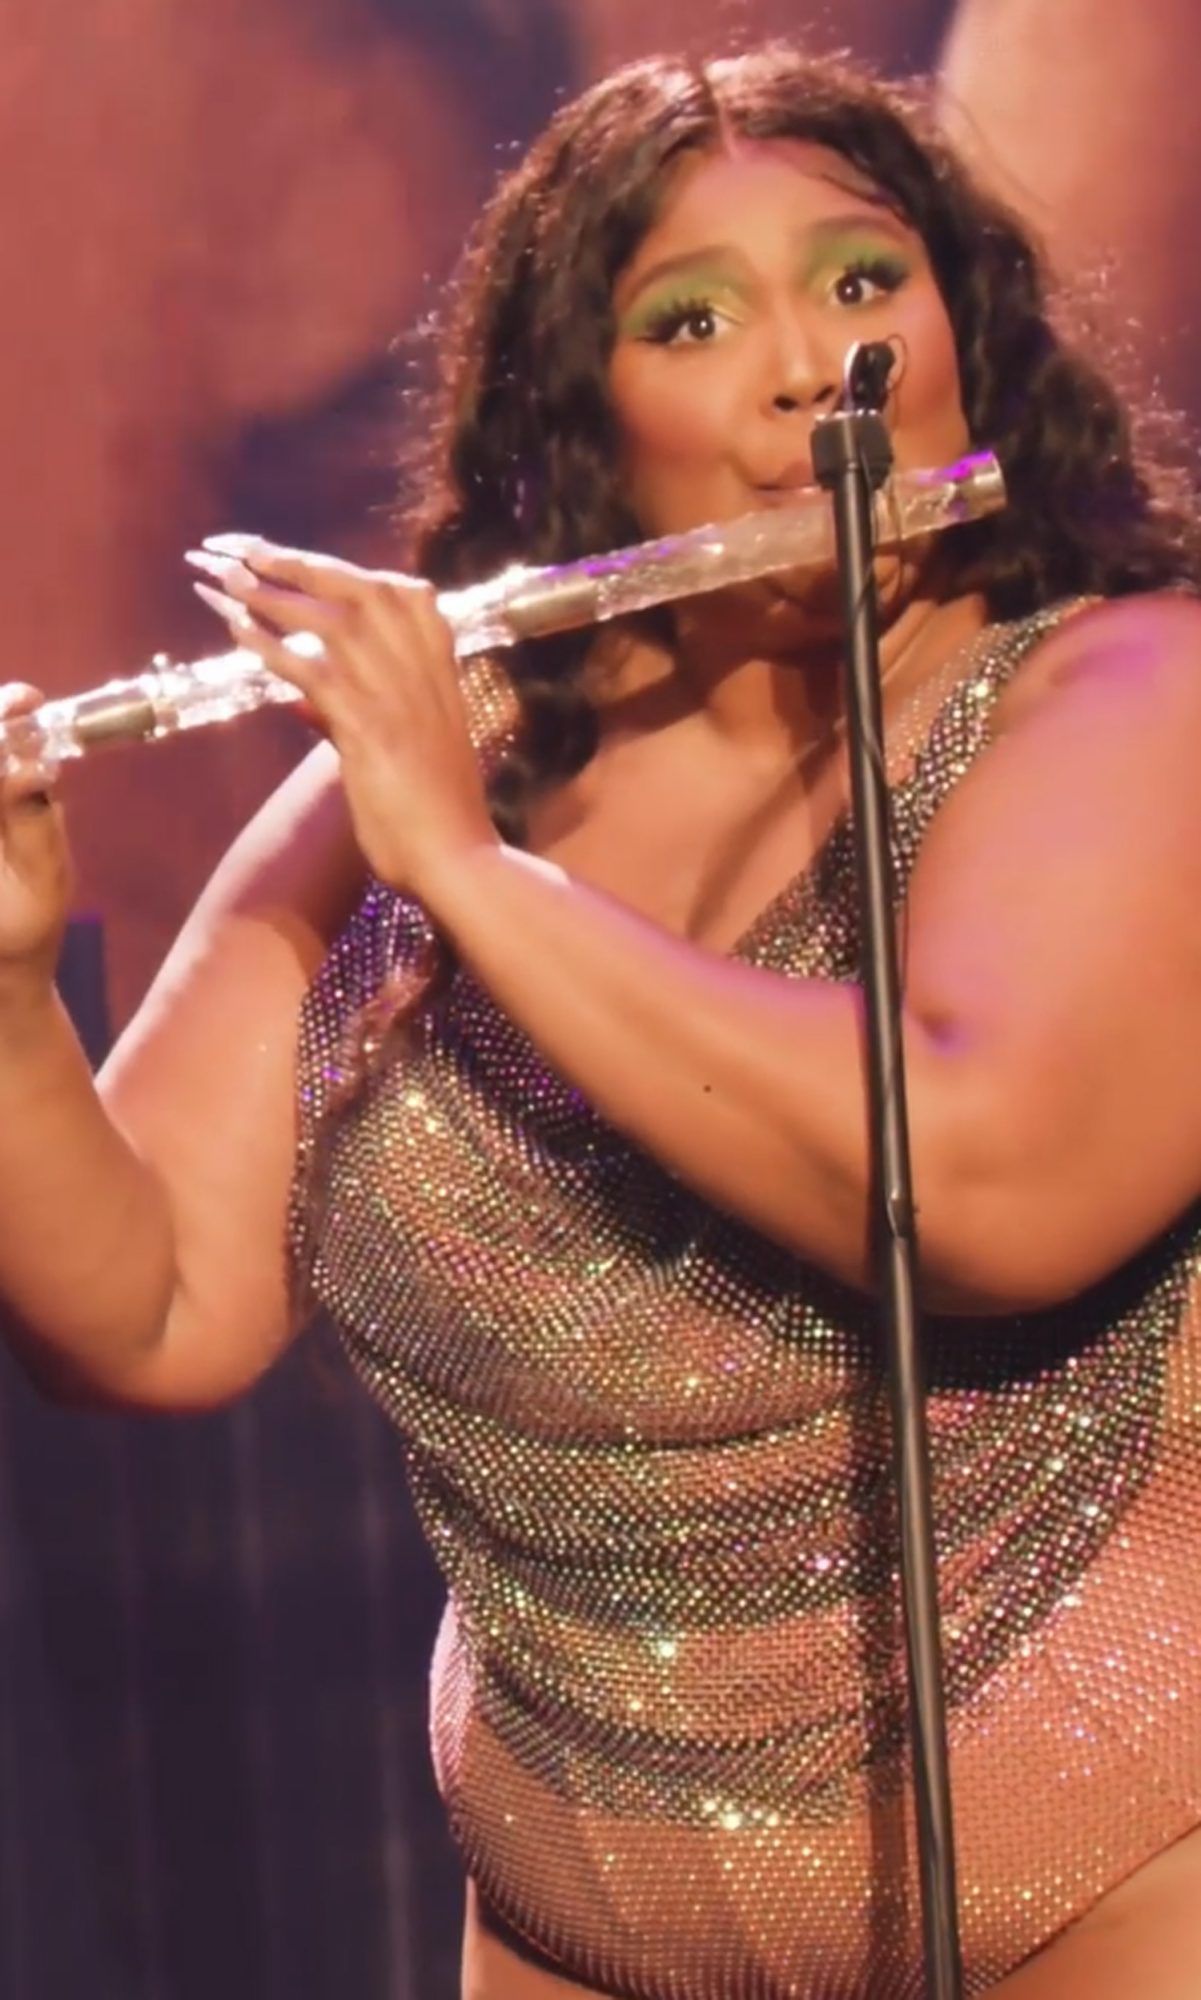 Lizzo plays 200 year old crystal flute on stage